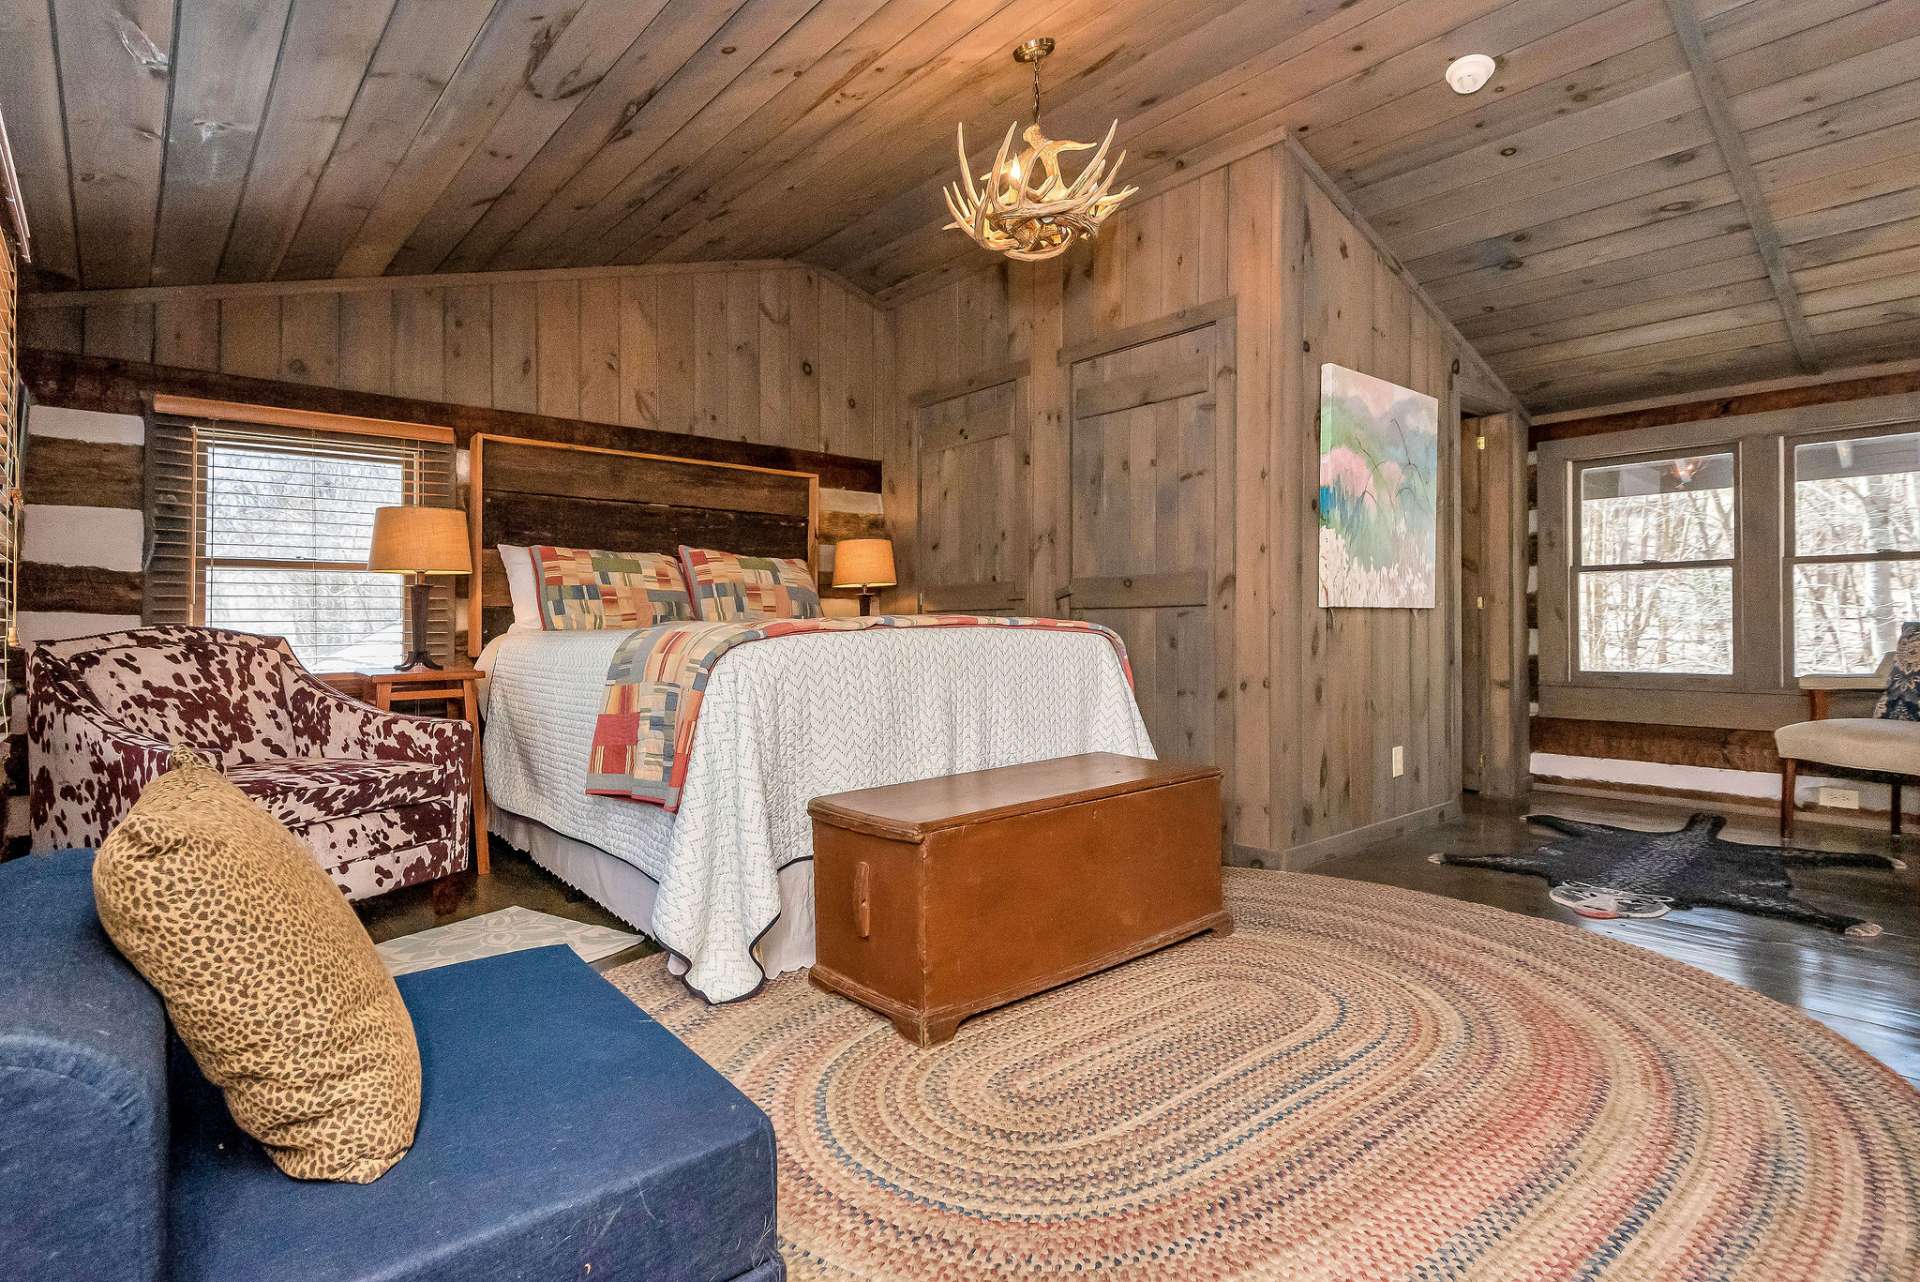 The open loft bedroom is a picturesque retreat that combines spaciousness with rustic charm, offering a cozy haven nestled beneath the vaulted ceiling. Its generous proportions allow for the inclusion of a cozy sitting area.